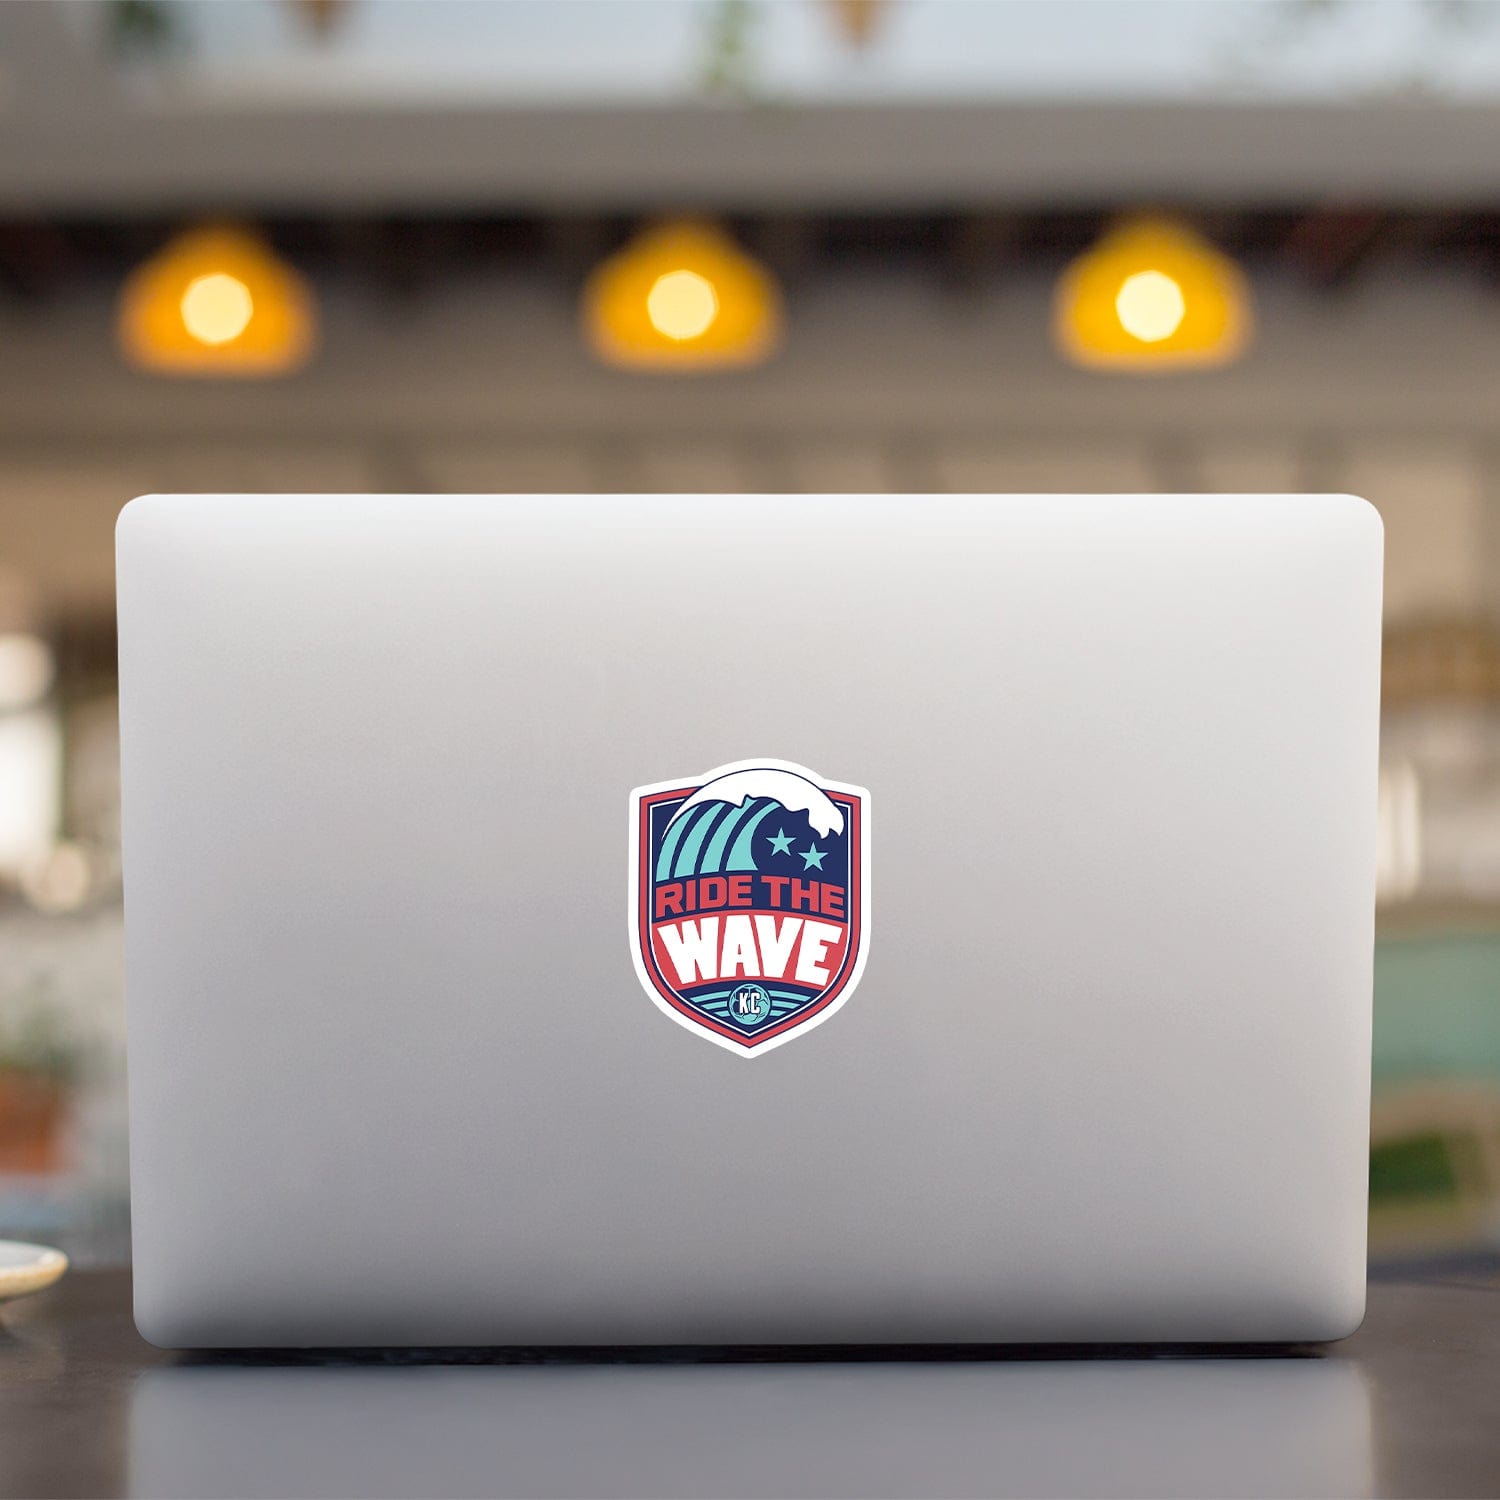 KC Swag Kansas City Current RIDE THE WAVE die-cut sticker decal made from waterproof vinyl on open laptop back